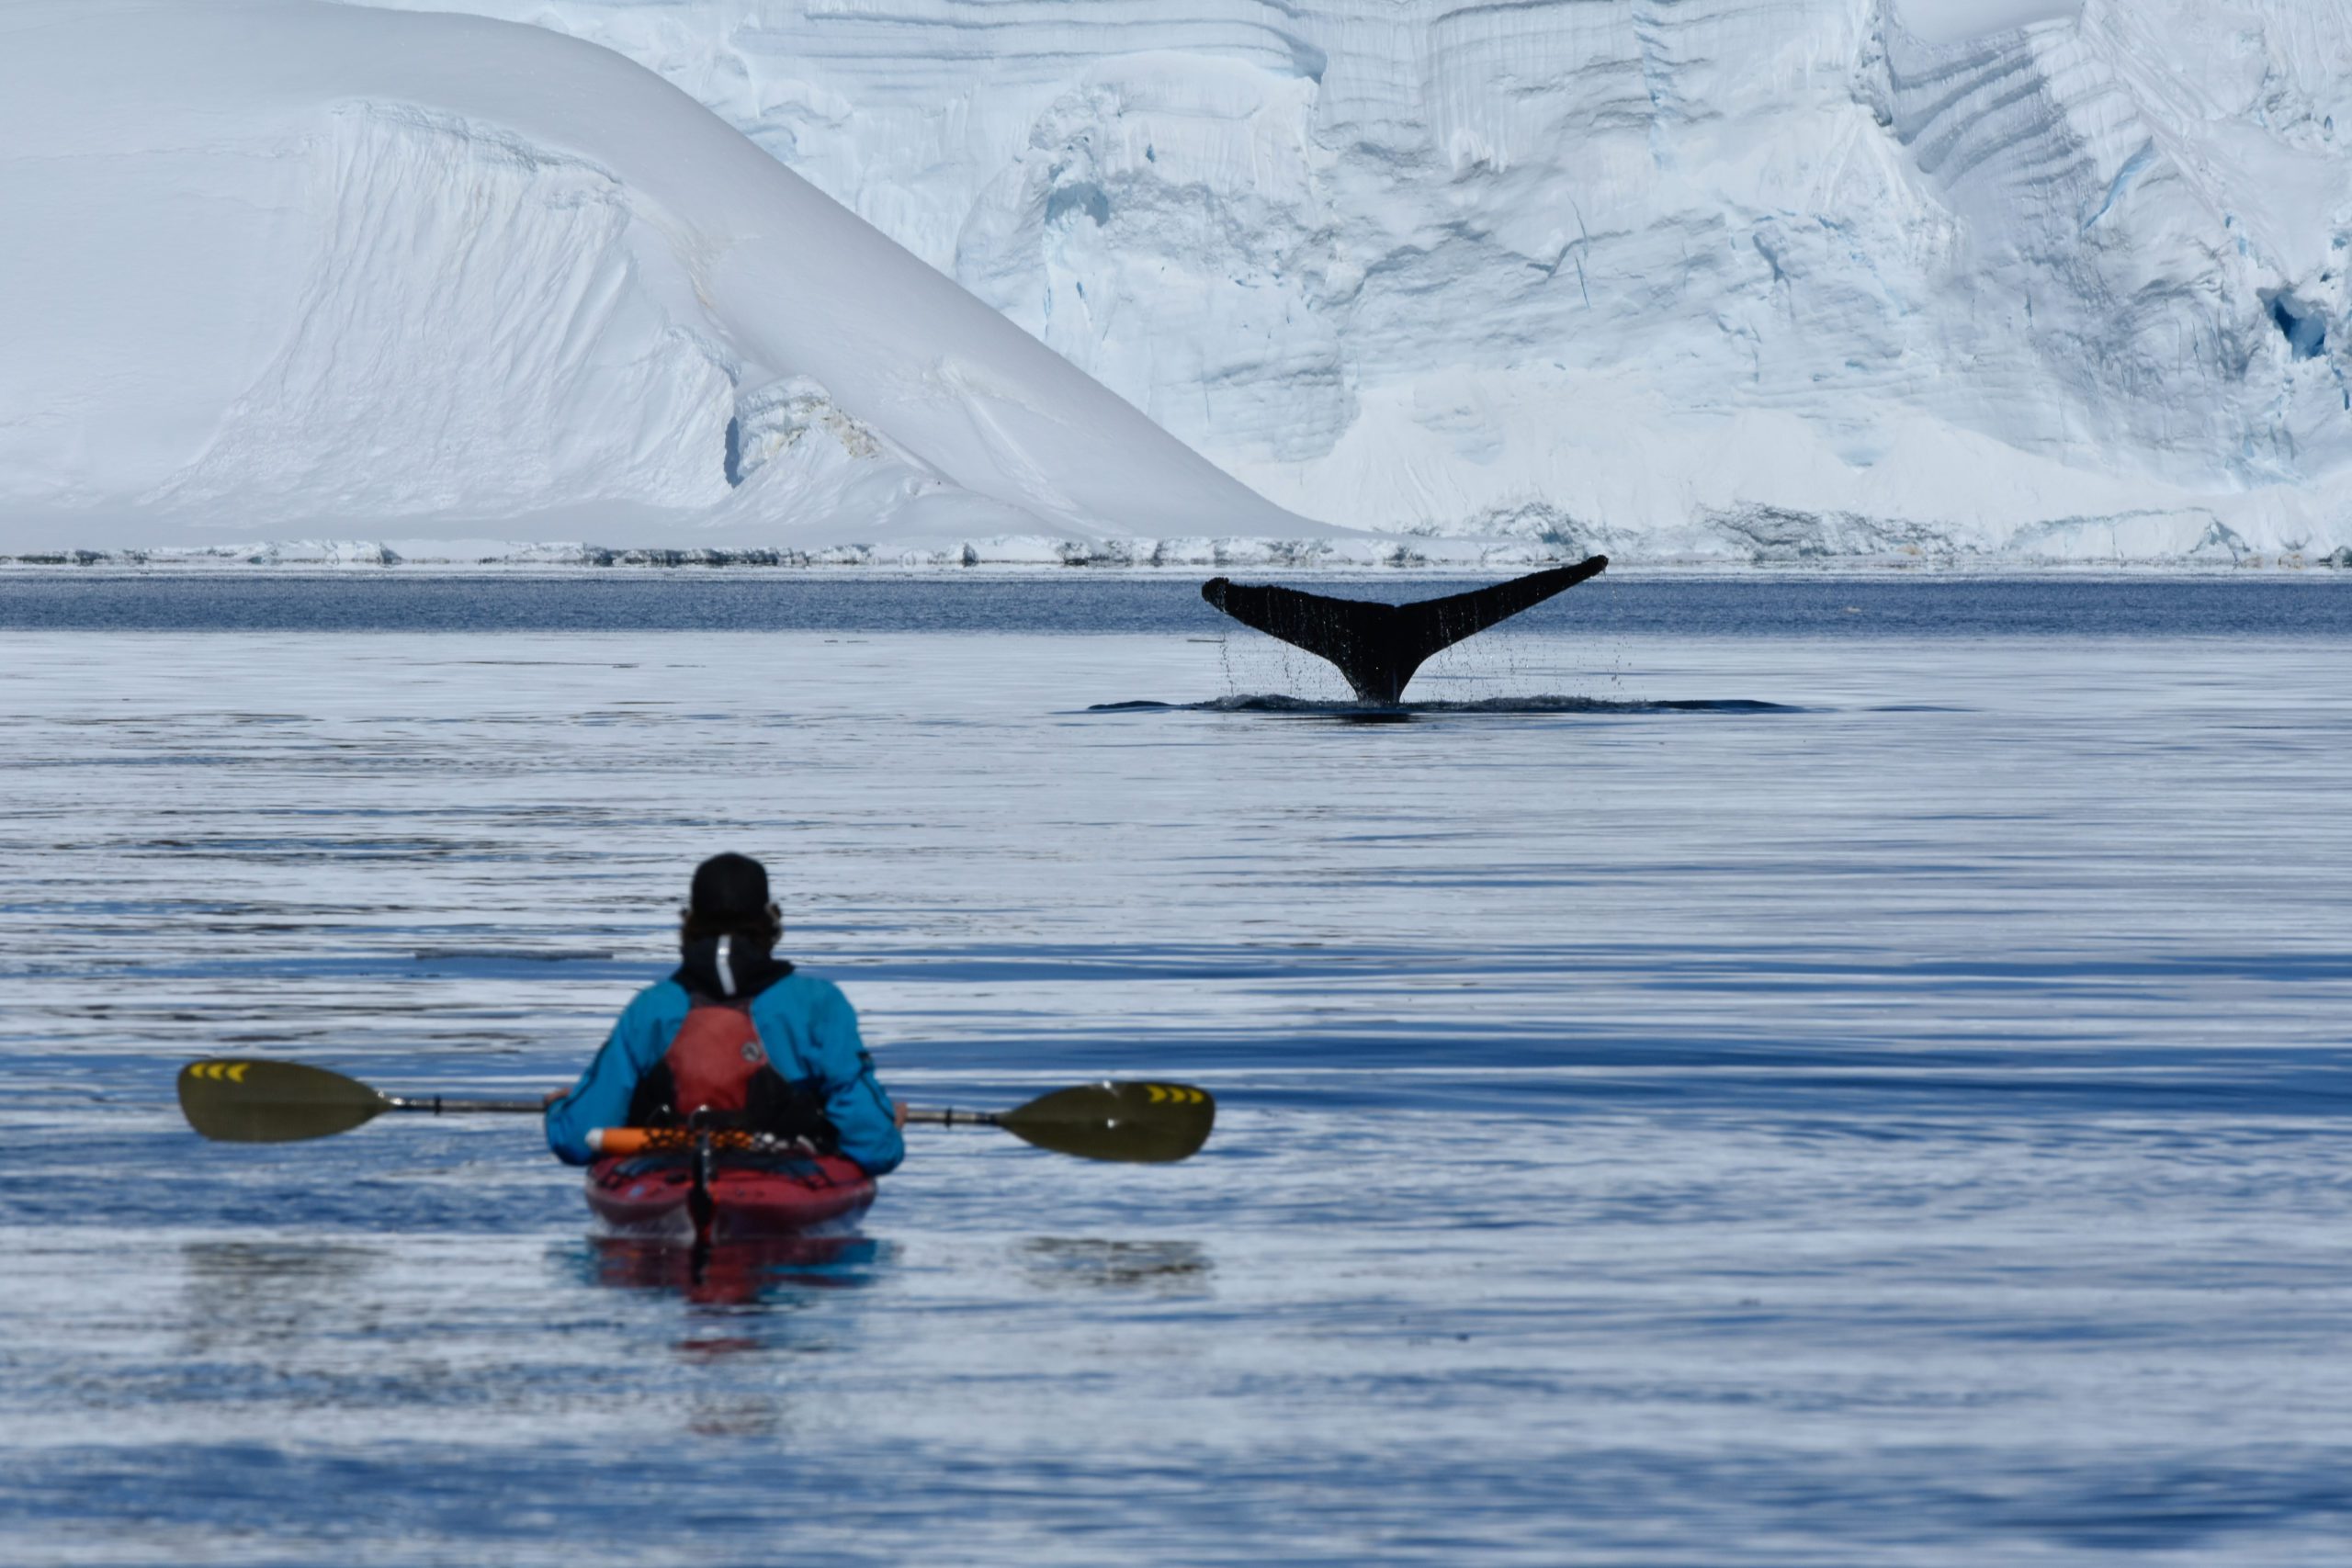 solo kayak-er observing the flute of a whale tail entering the water near the shores of the Antarctic Peninsula